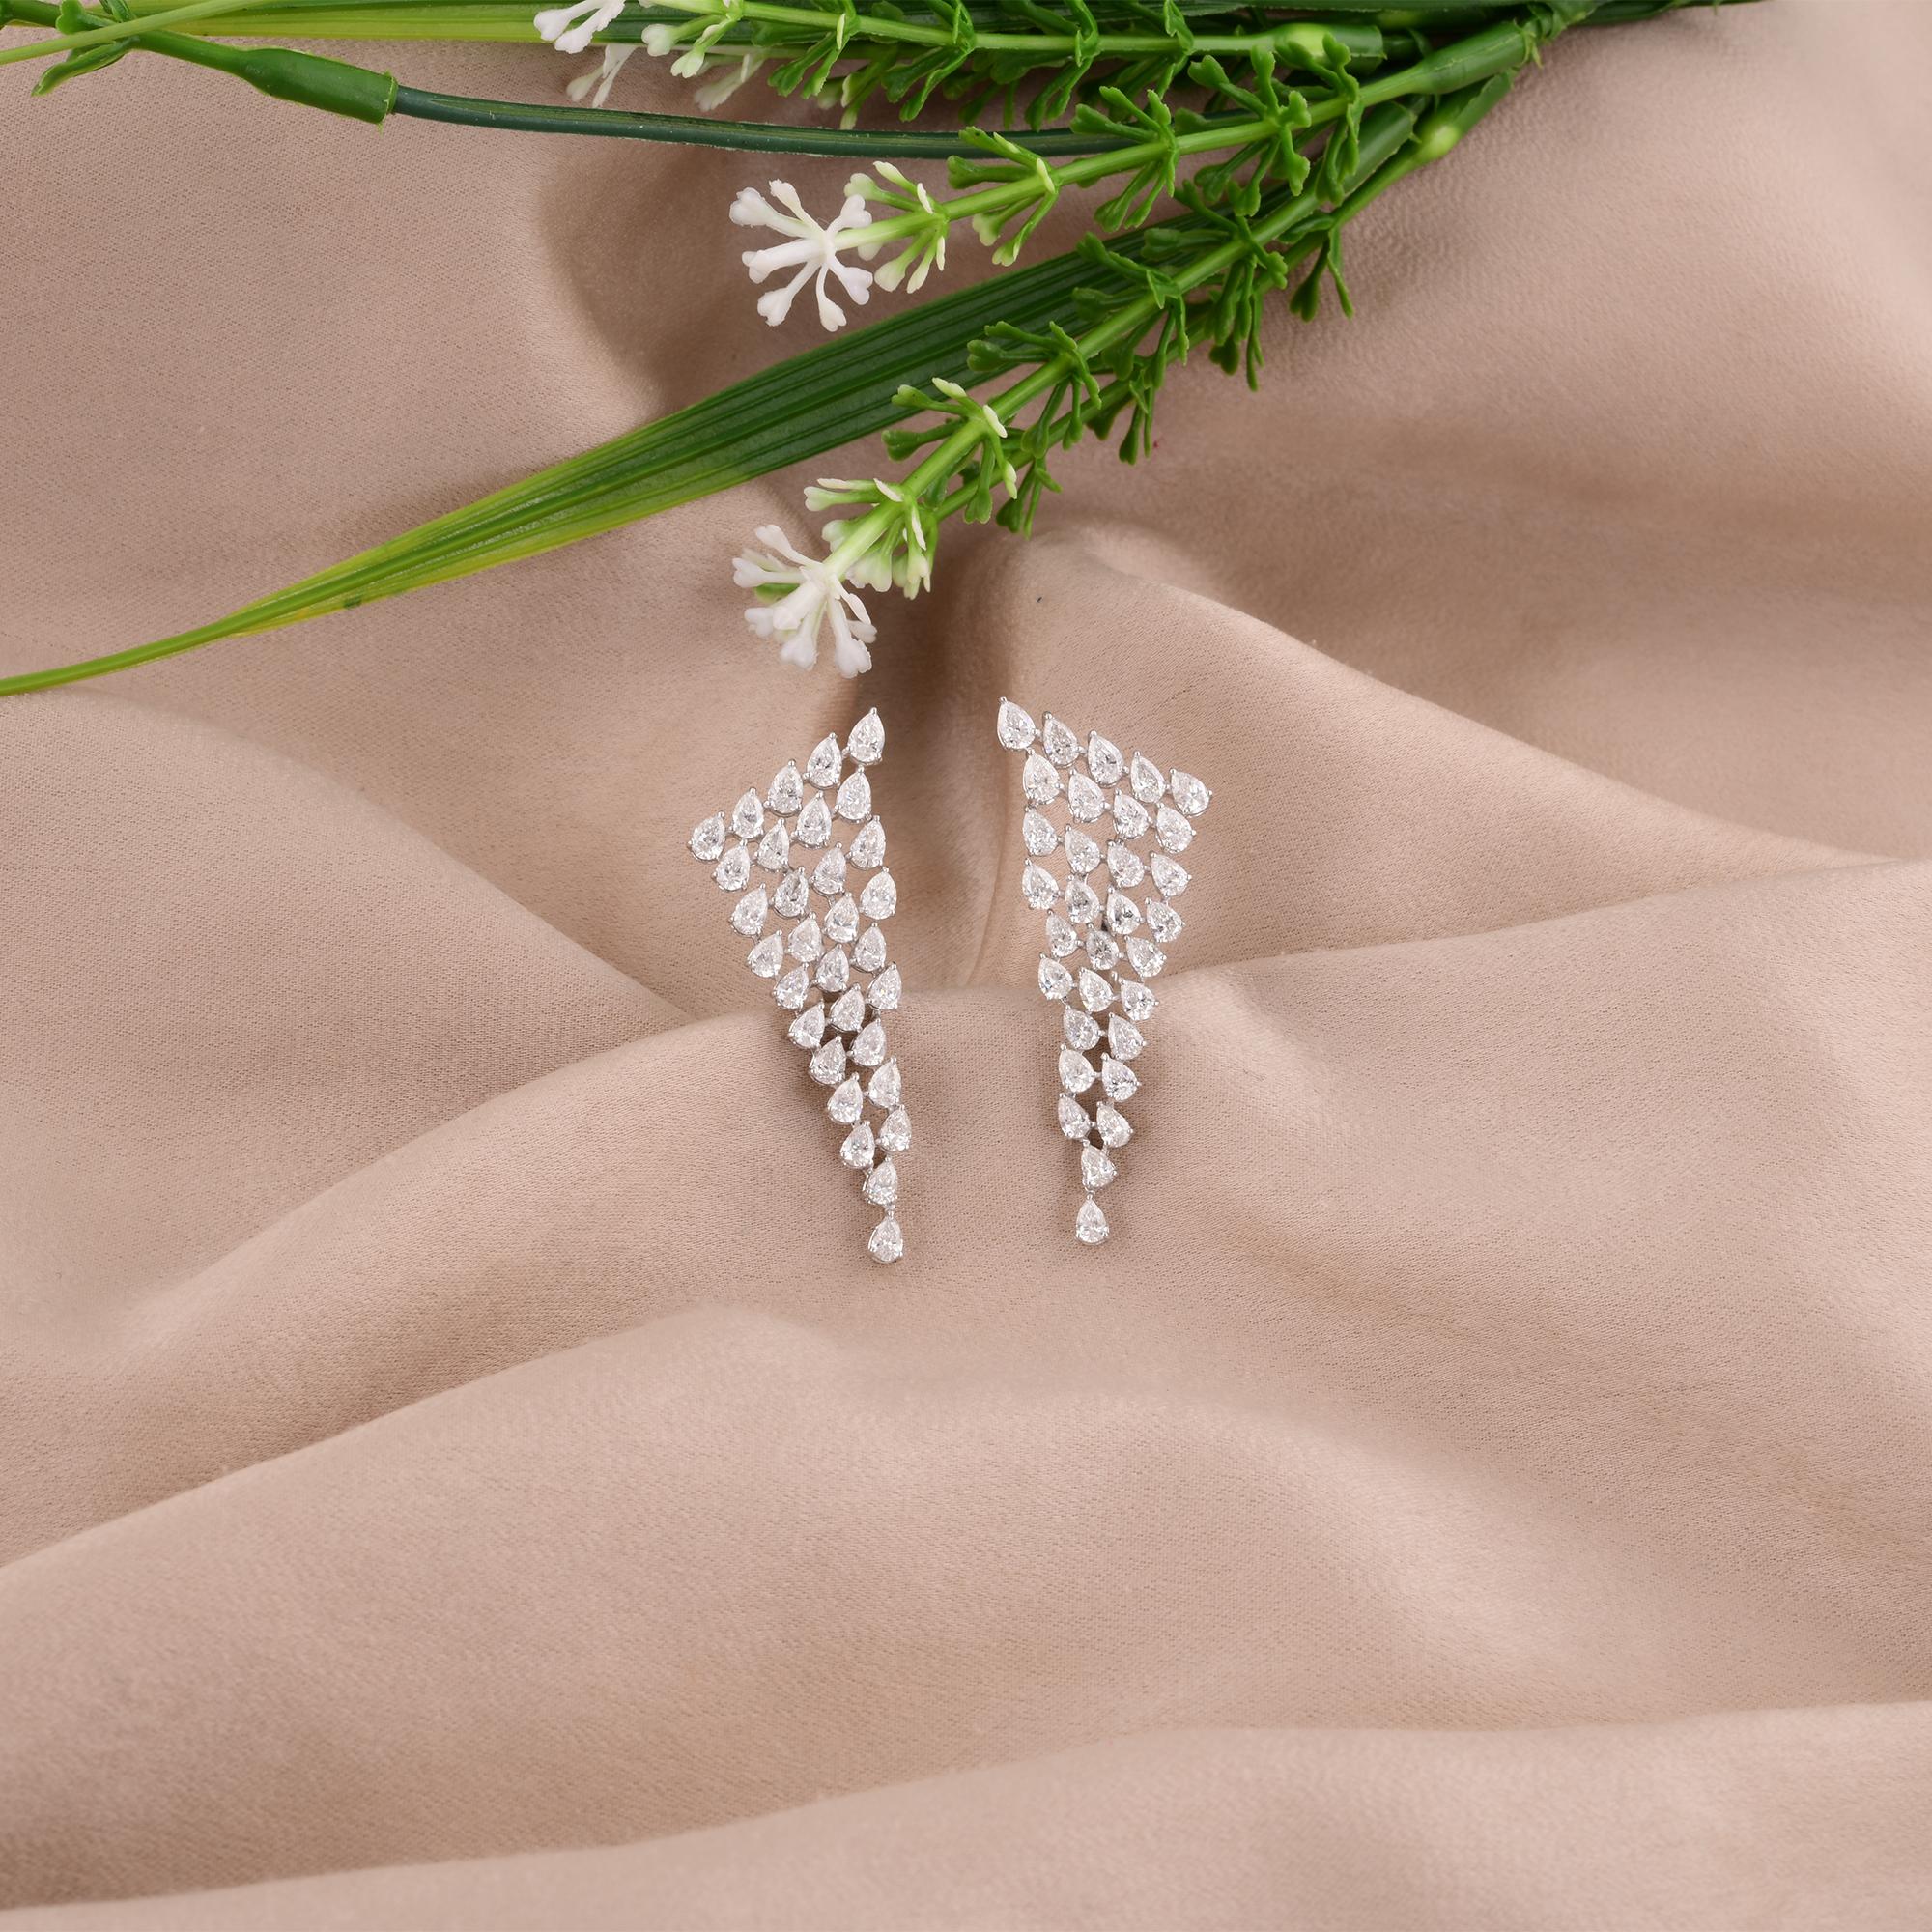 Crafted from 14 karat white gold, a precious metal celebrated for its luminous purity and enduring elegance, the setting of these earrings provides the perfect backdrop for the resplendent diamonds. The sleek and polished white gold enhances the